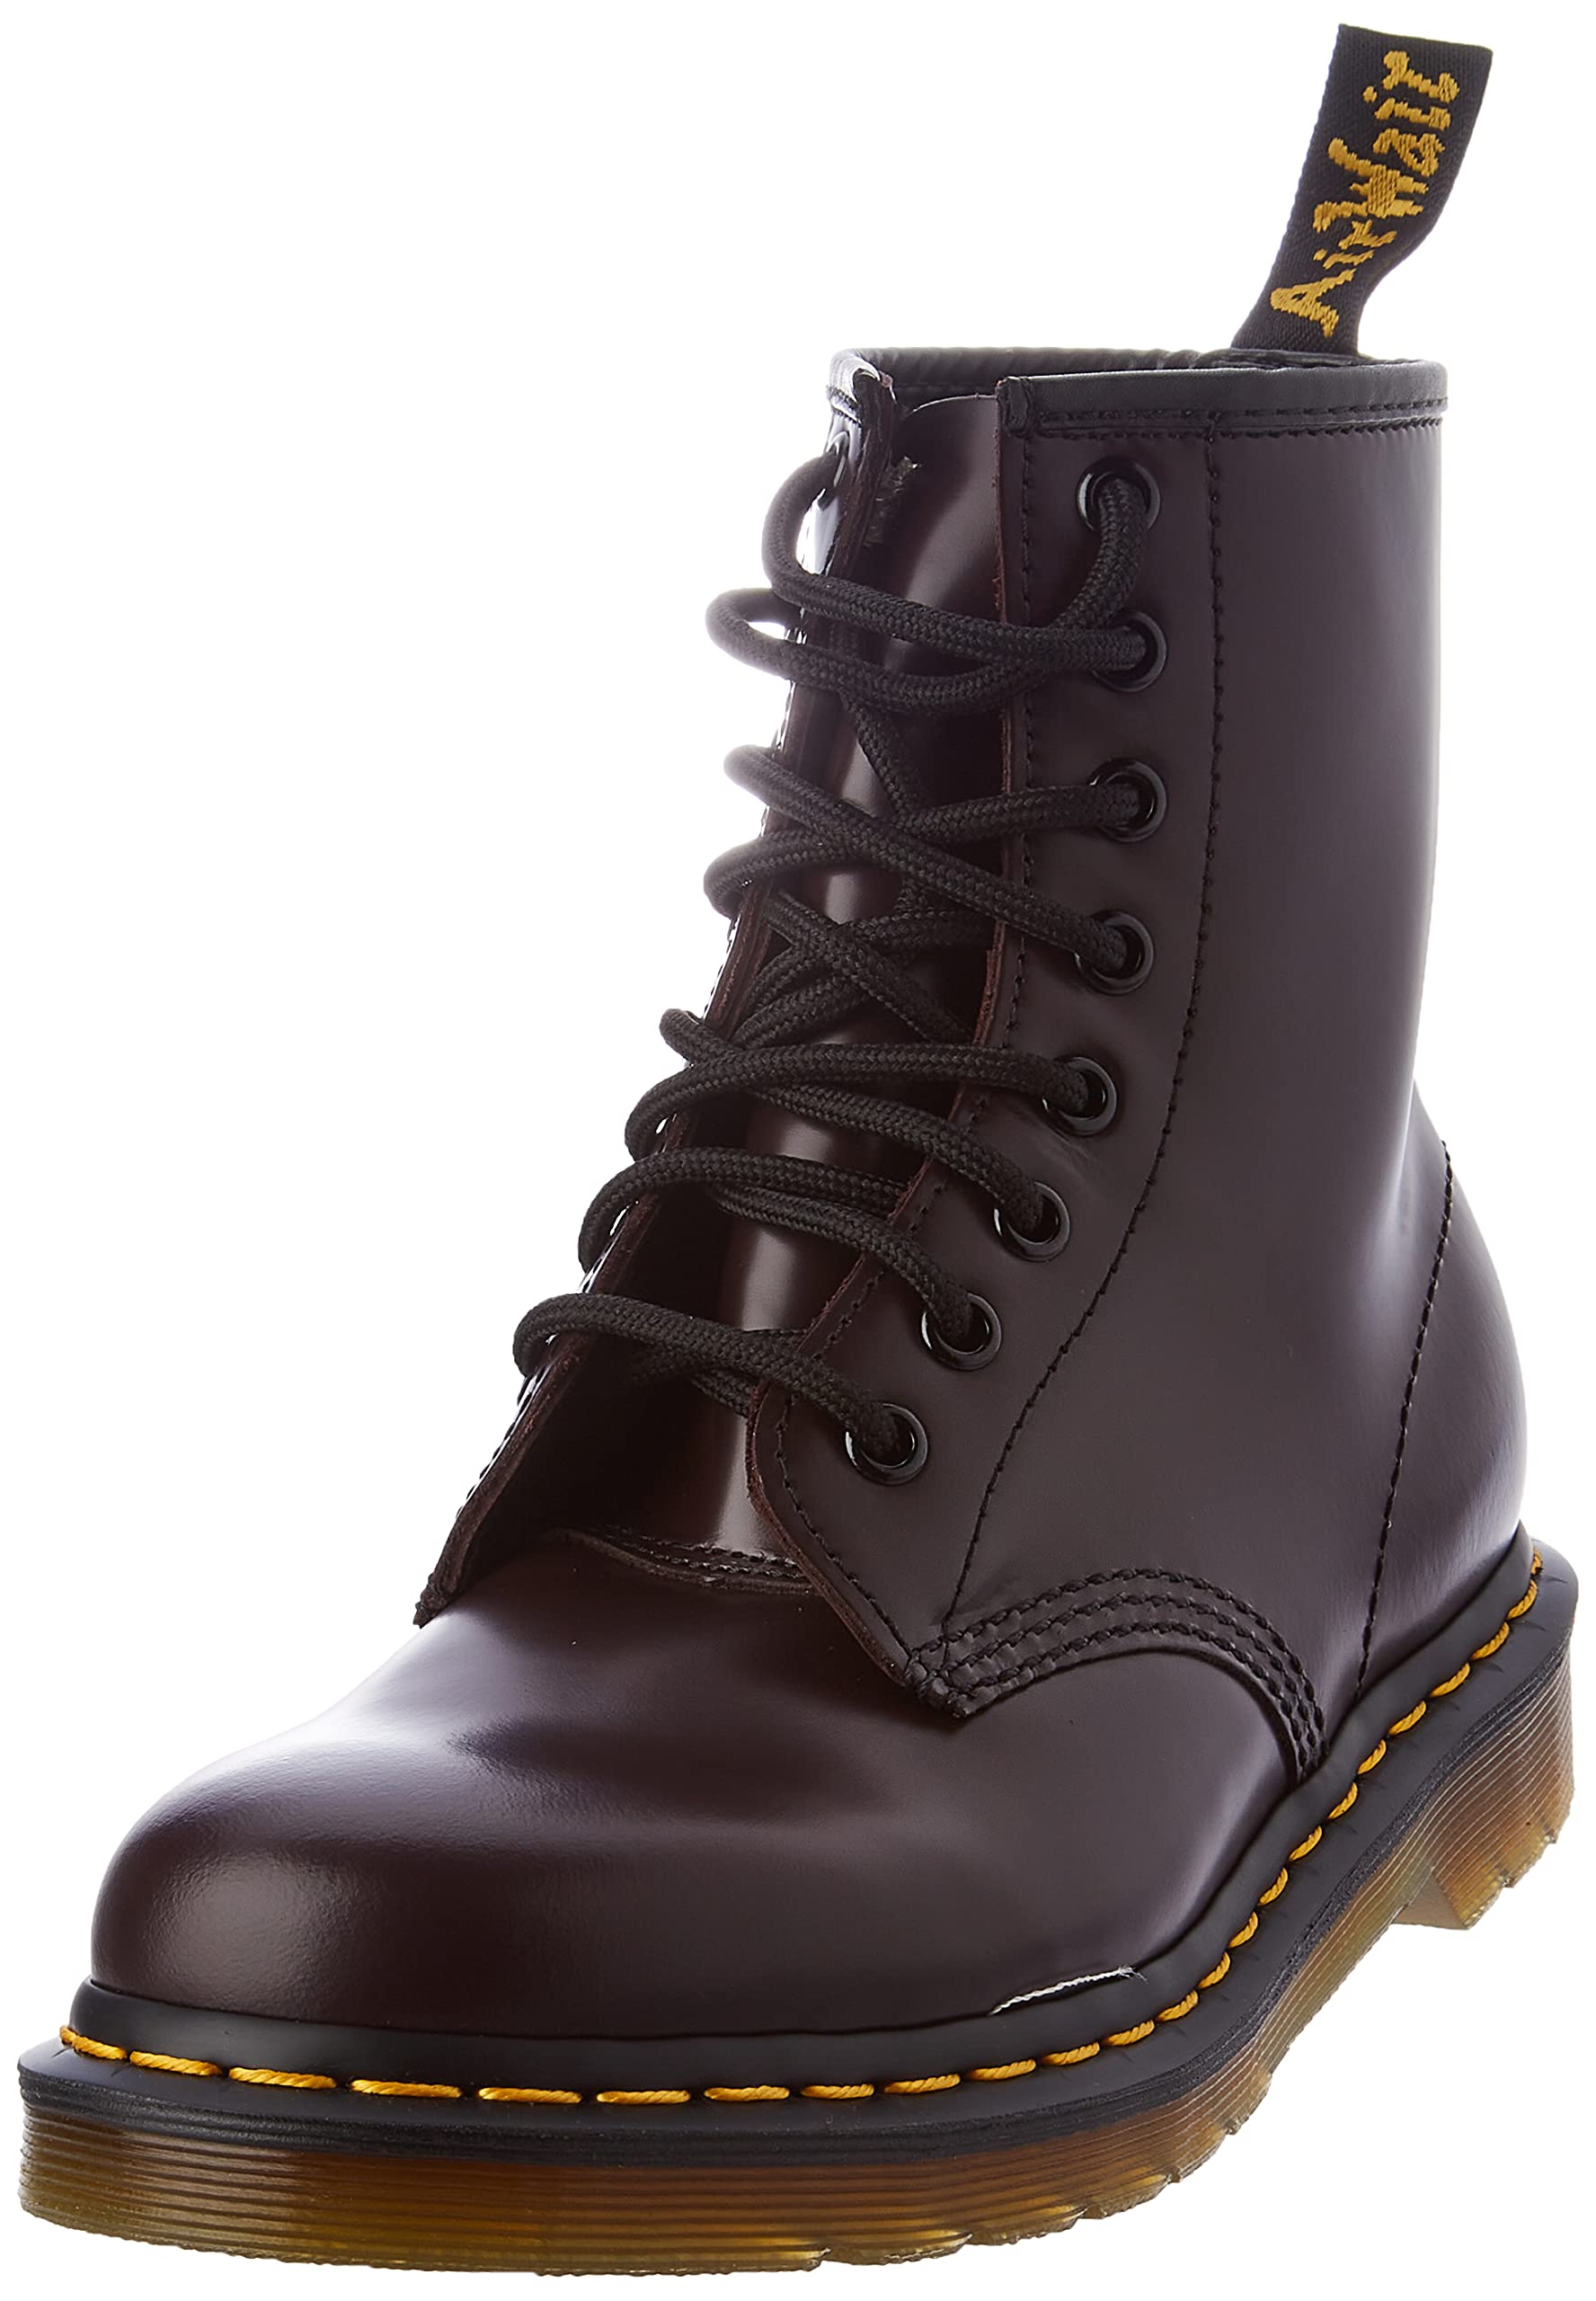 luxe  Dr. Martens, bovver boots Homme PLfdy90x2 Boutique